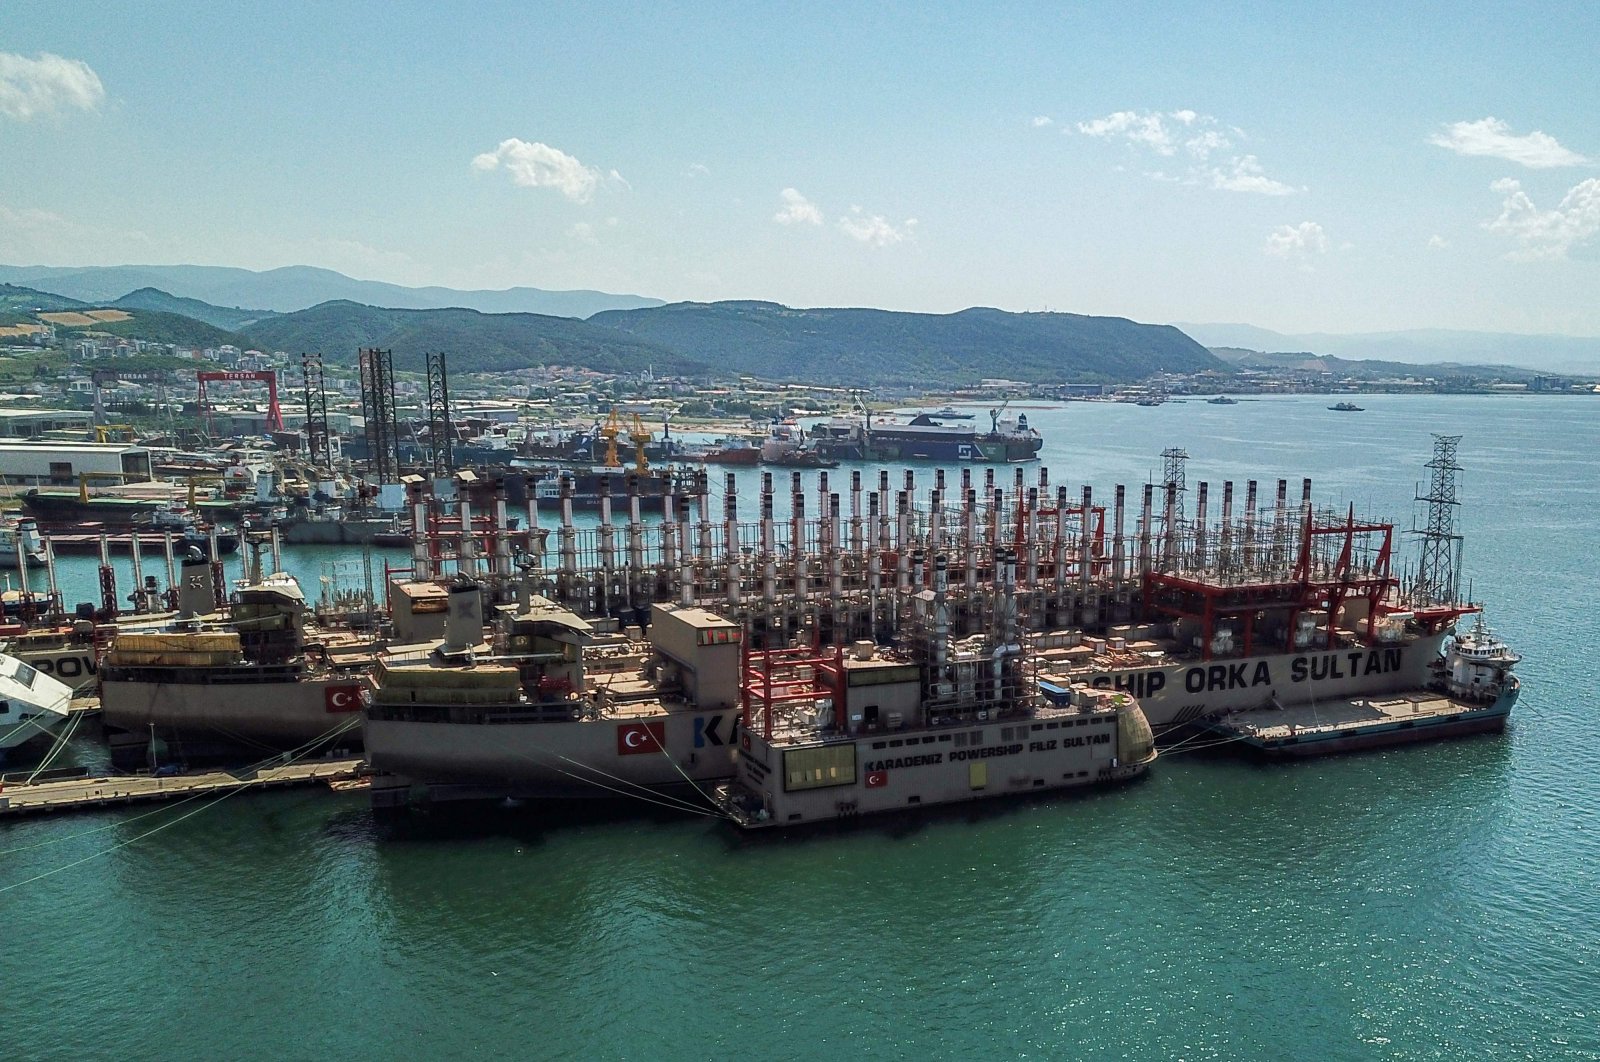 The powerships Orca Sultan (front) and Raif Bey (back) docked in a shipyard in Altinova district, Yalova, Turkey, June 16, 2020. (AFP Photo)